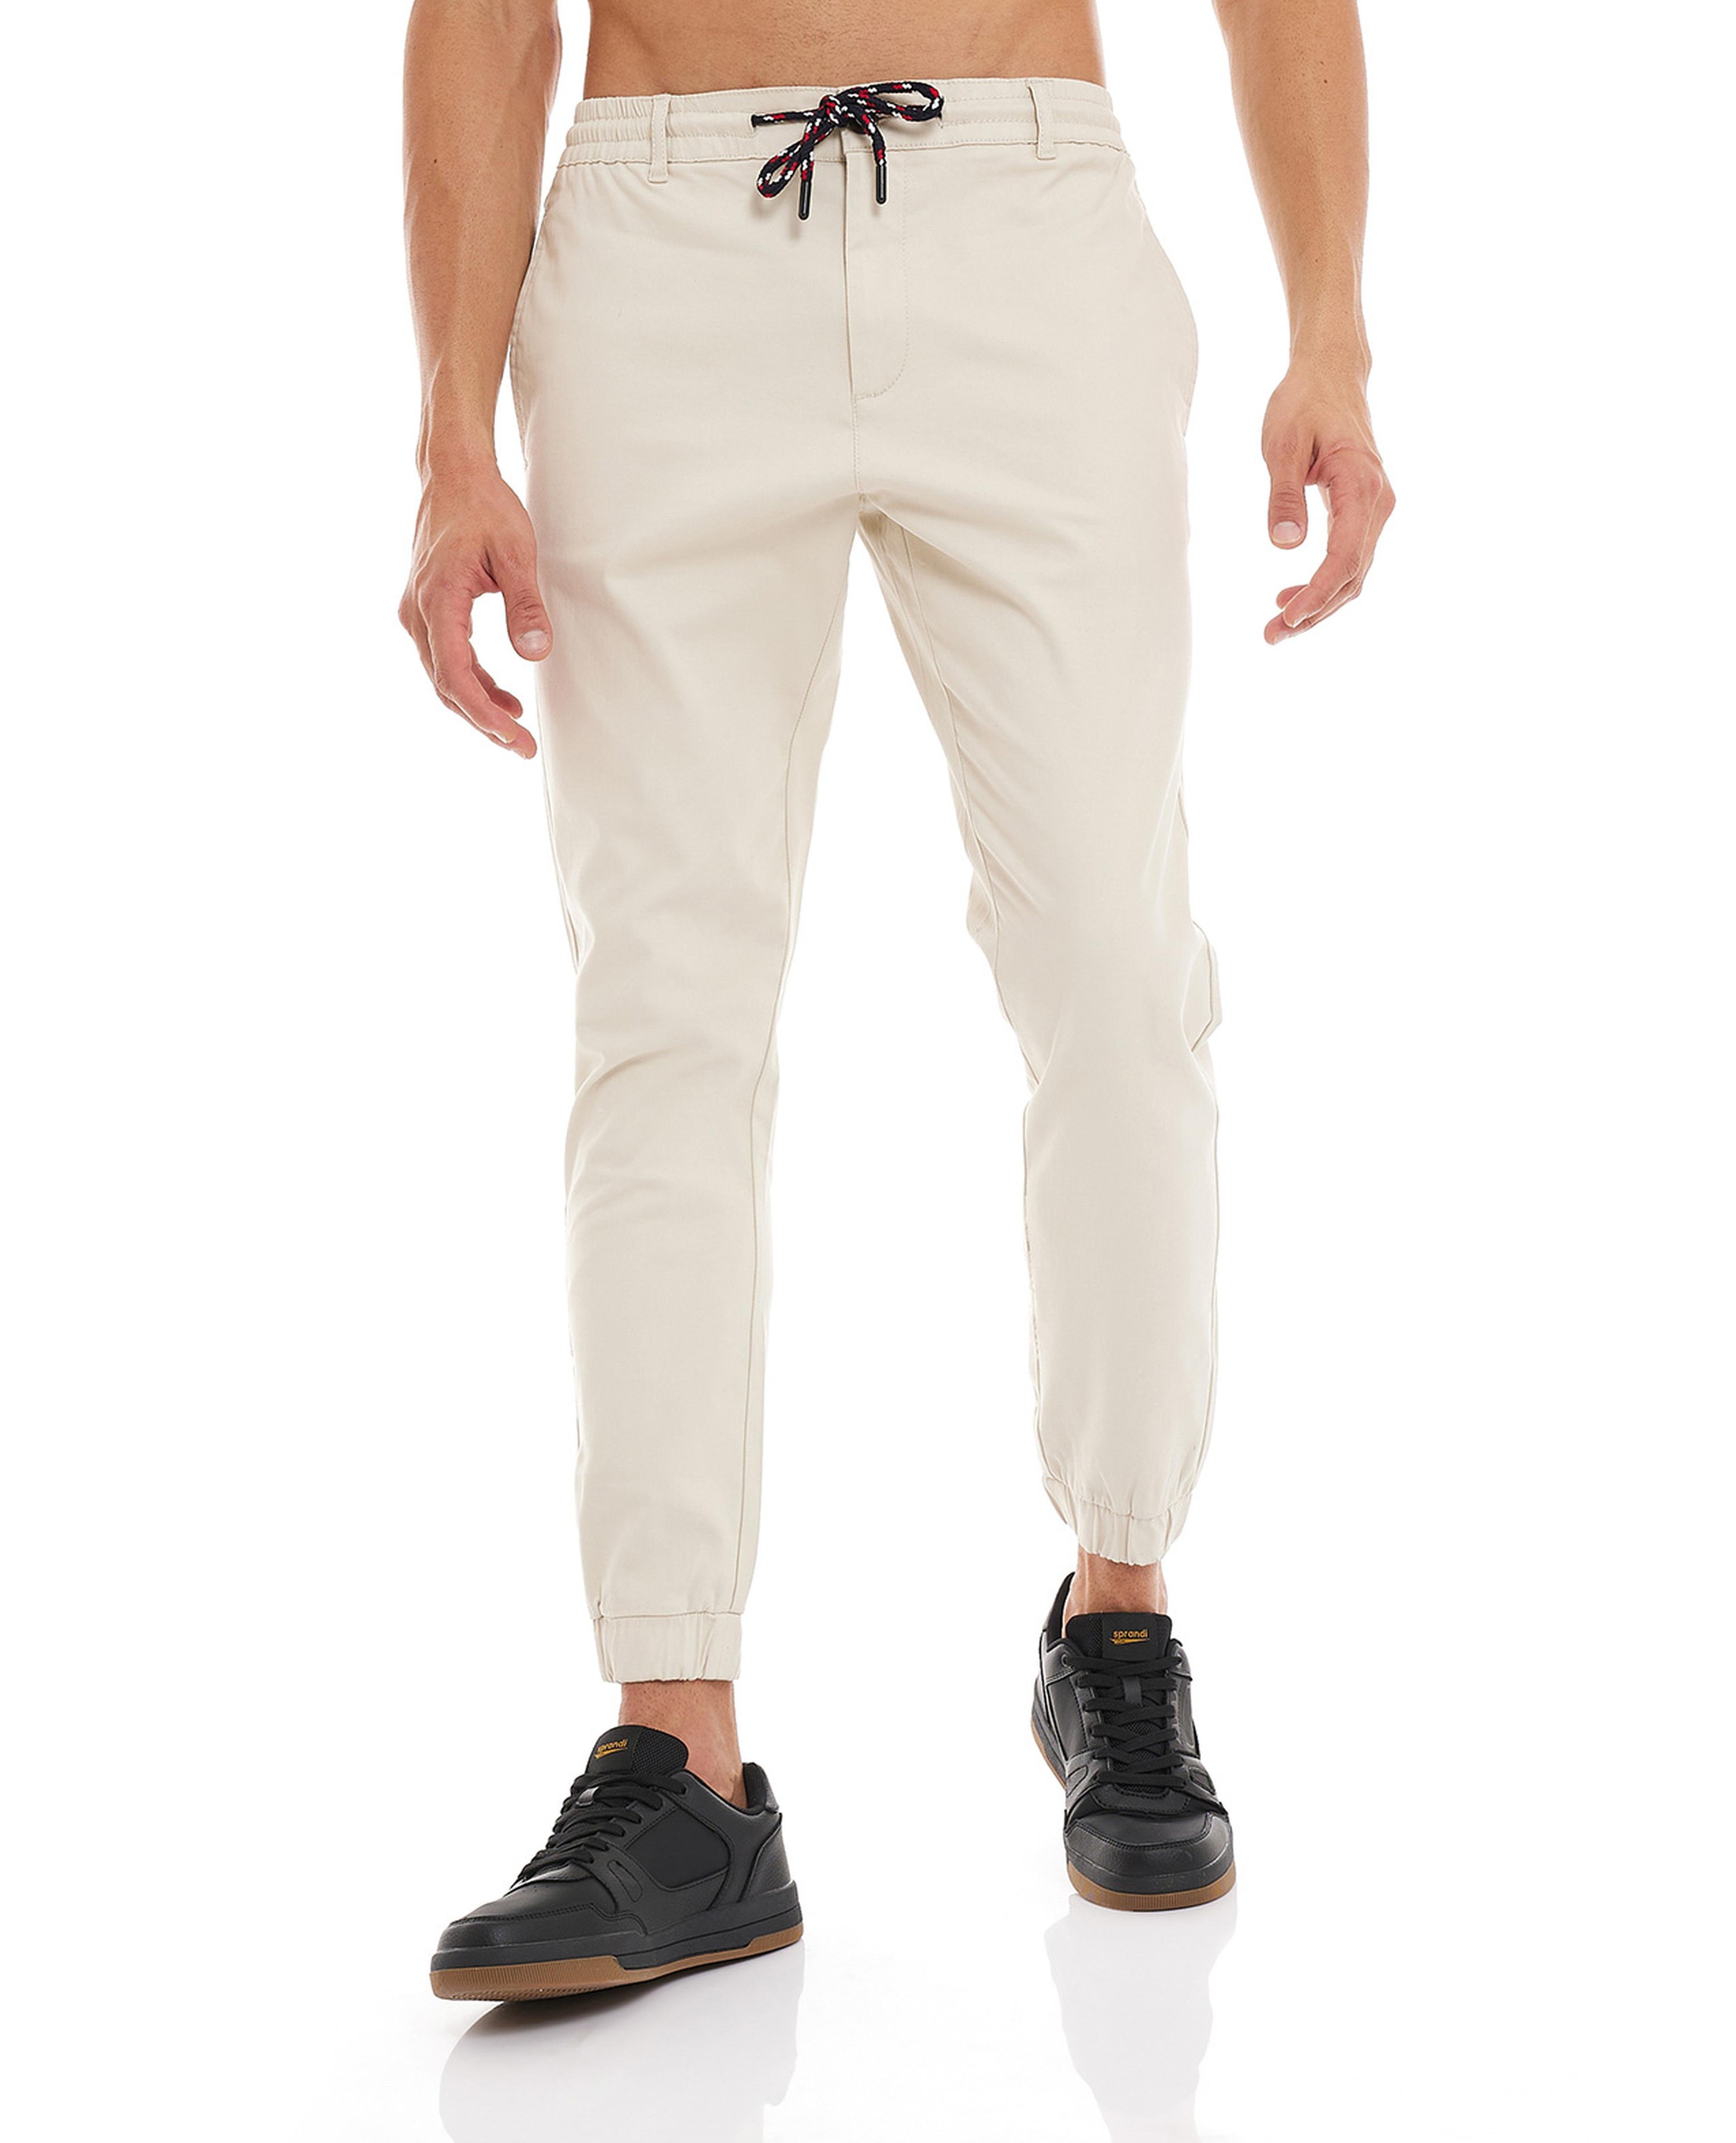 Solid Jogger Style Pants with Drawstring Waist